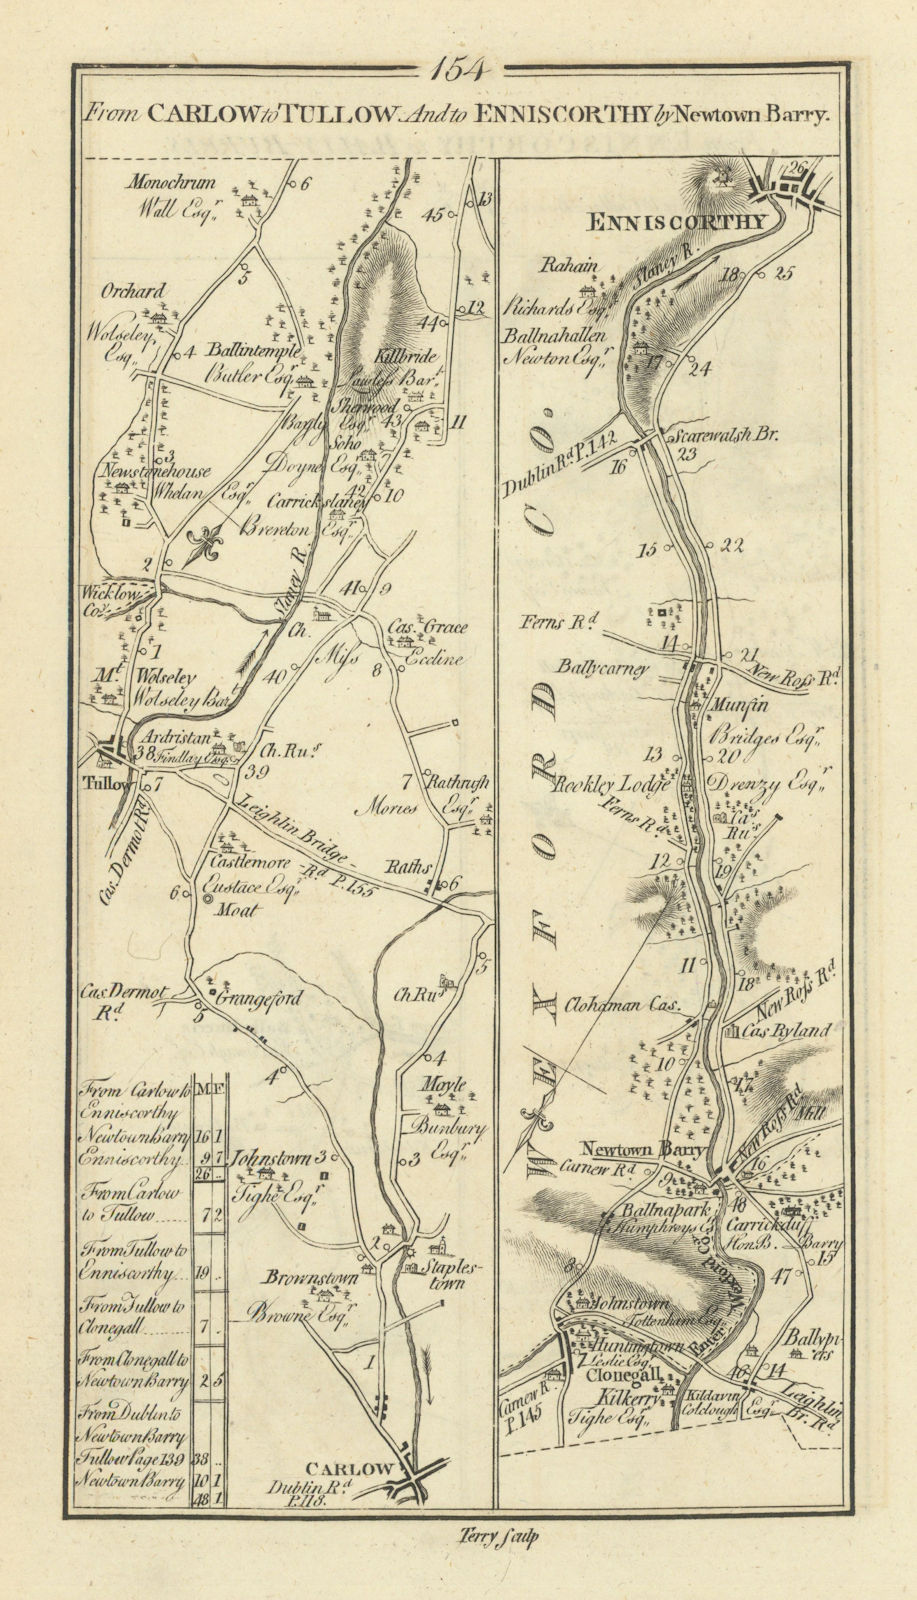 Associate Product #154 Carlow to Tullow, Bunclody & Enniscorthy. Clonegall TAYLOR/SKINNER 1778 map